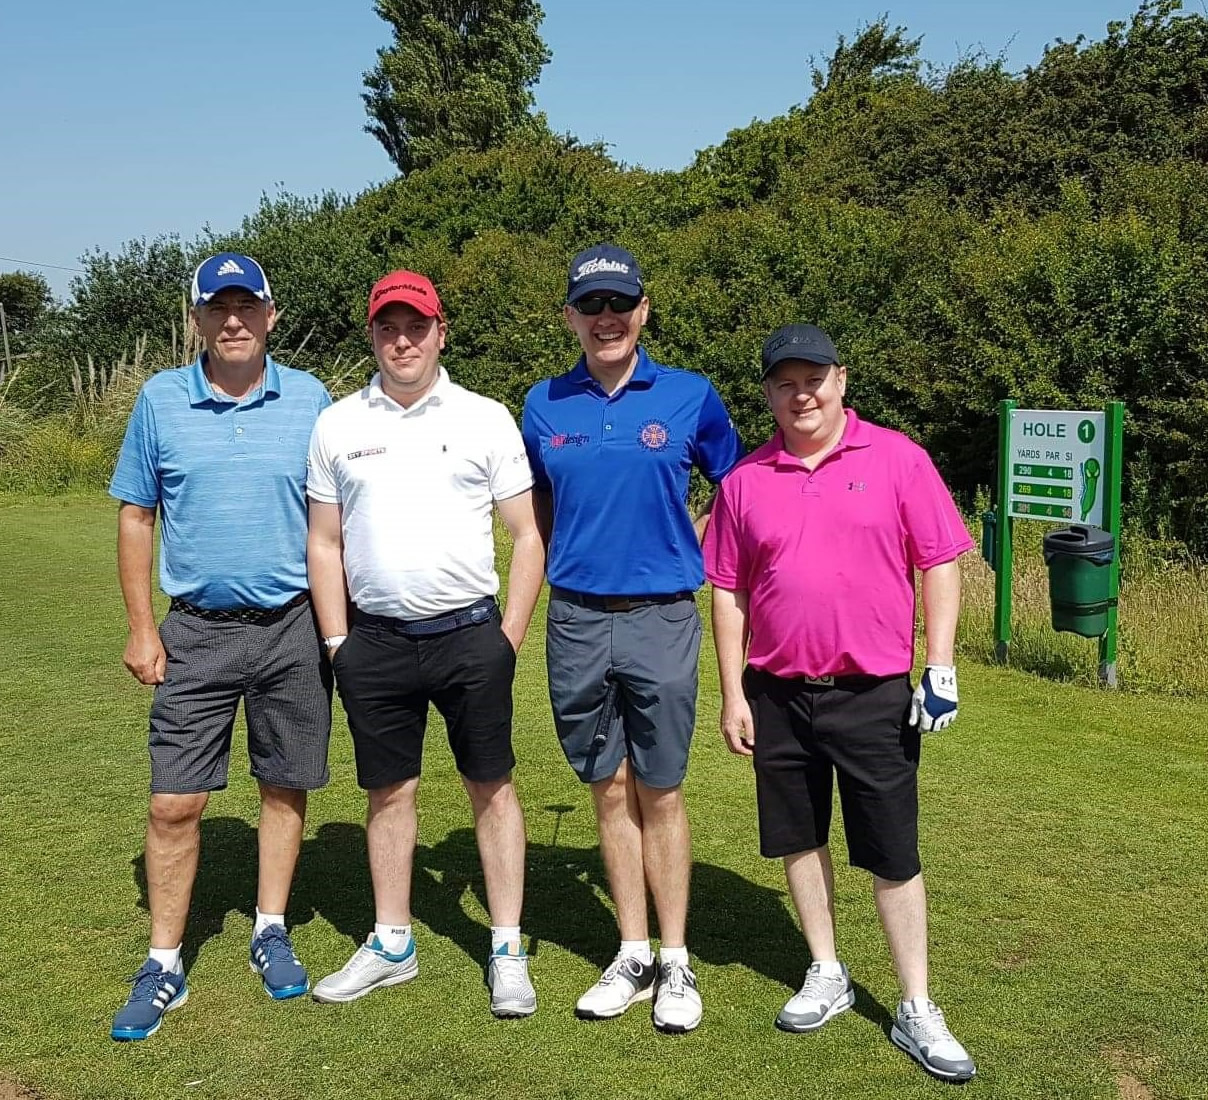 !! Lydd Golf Course June 19 - St Stephen's Society Day in Kent